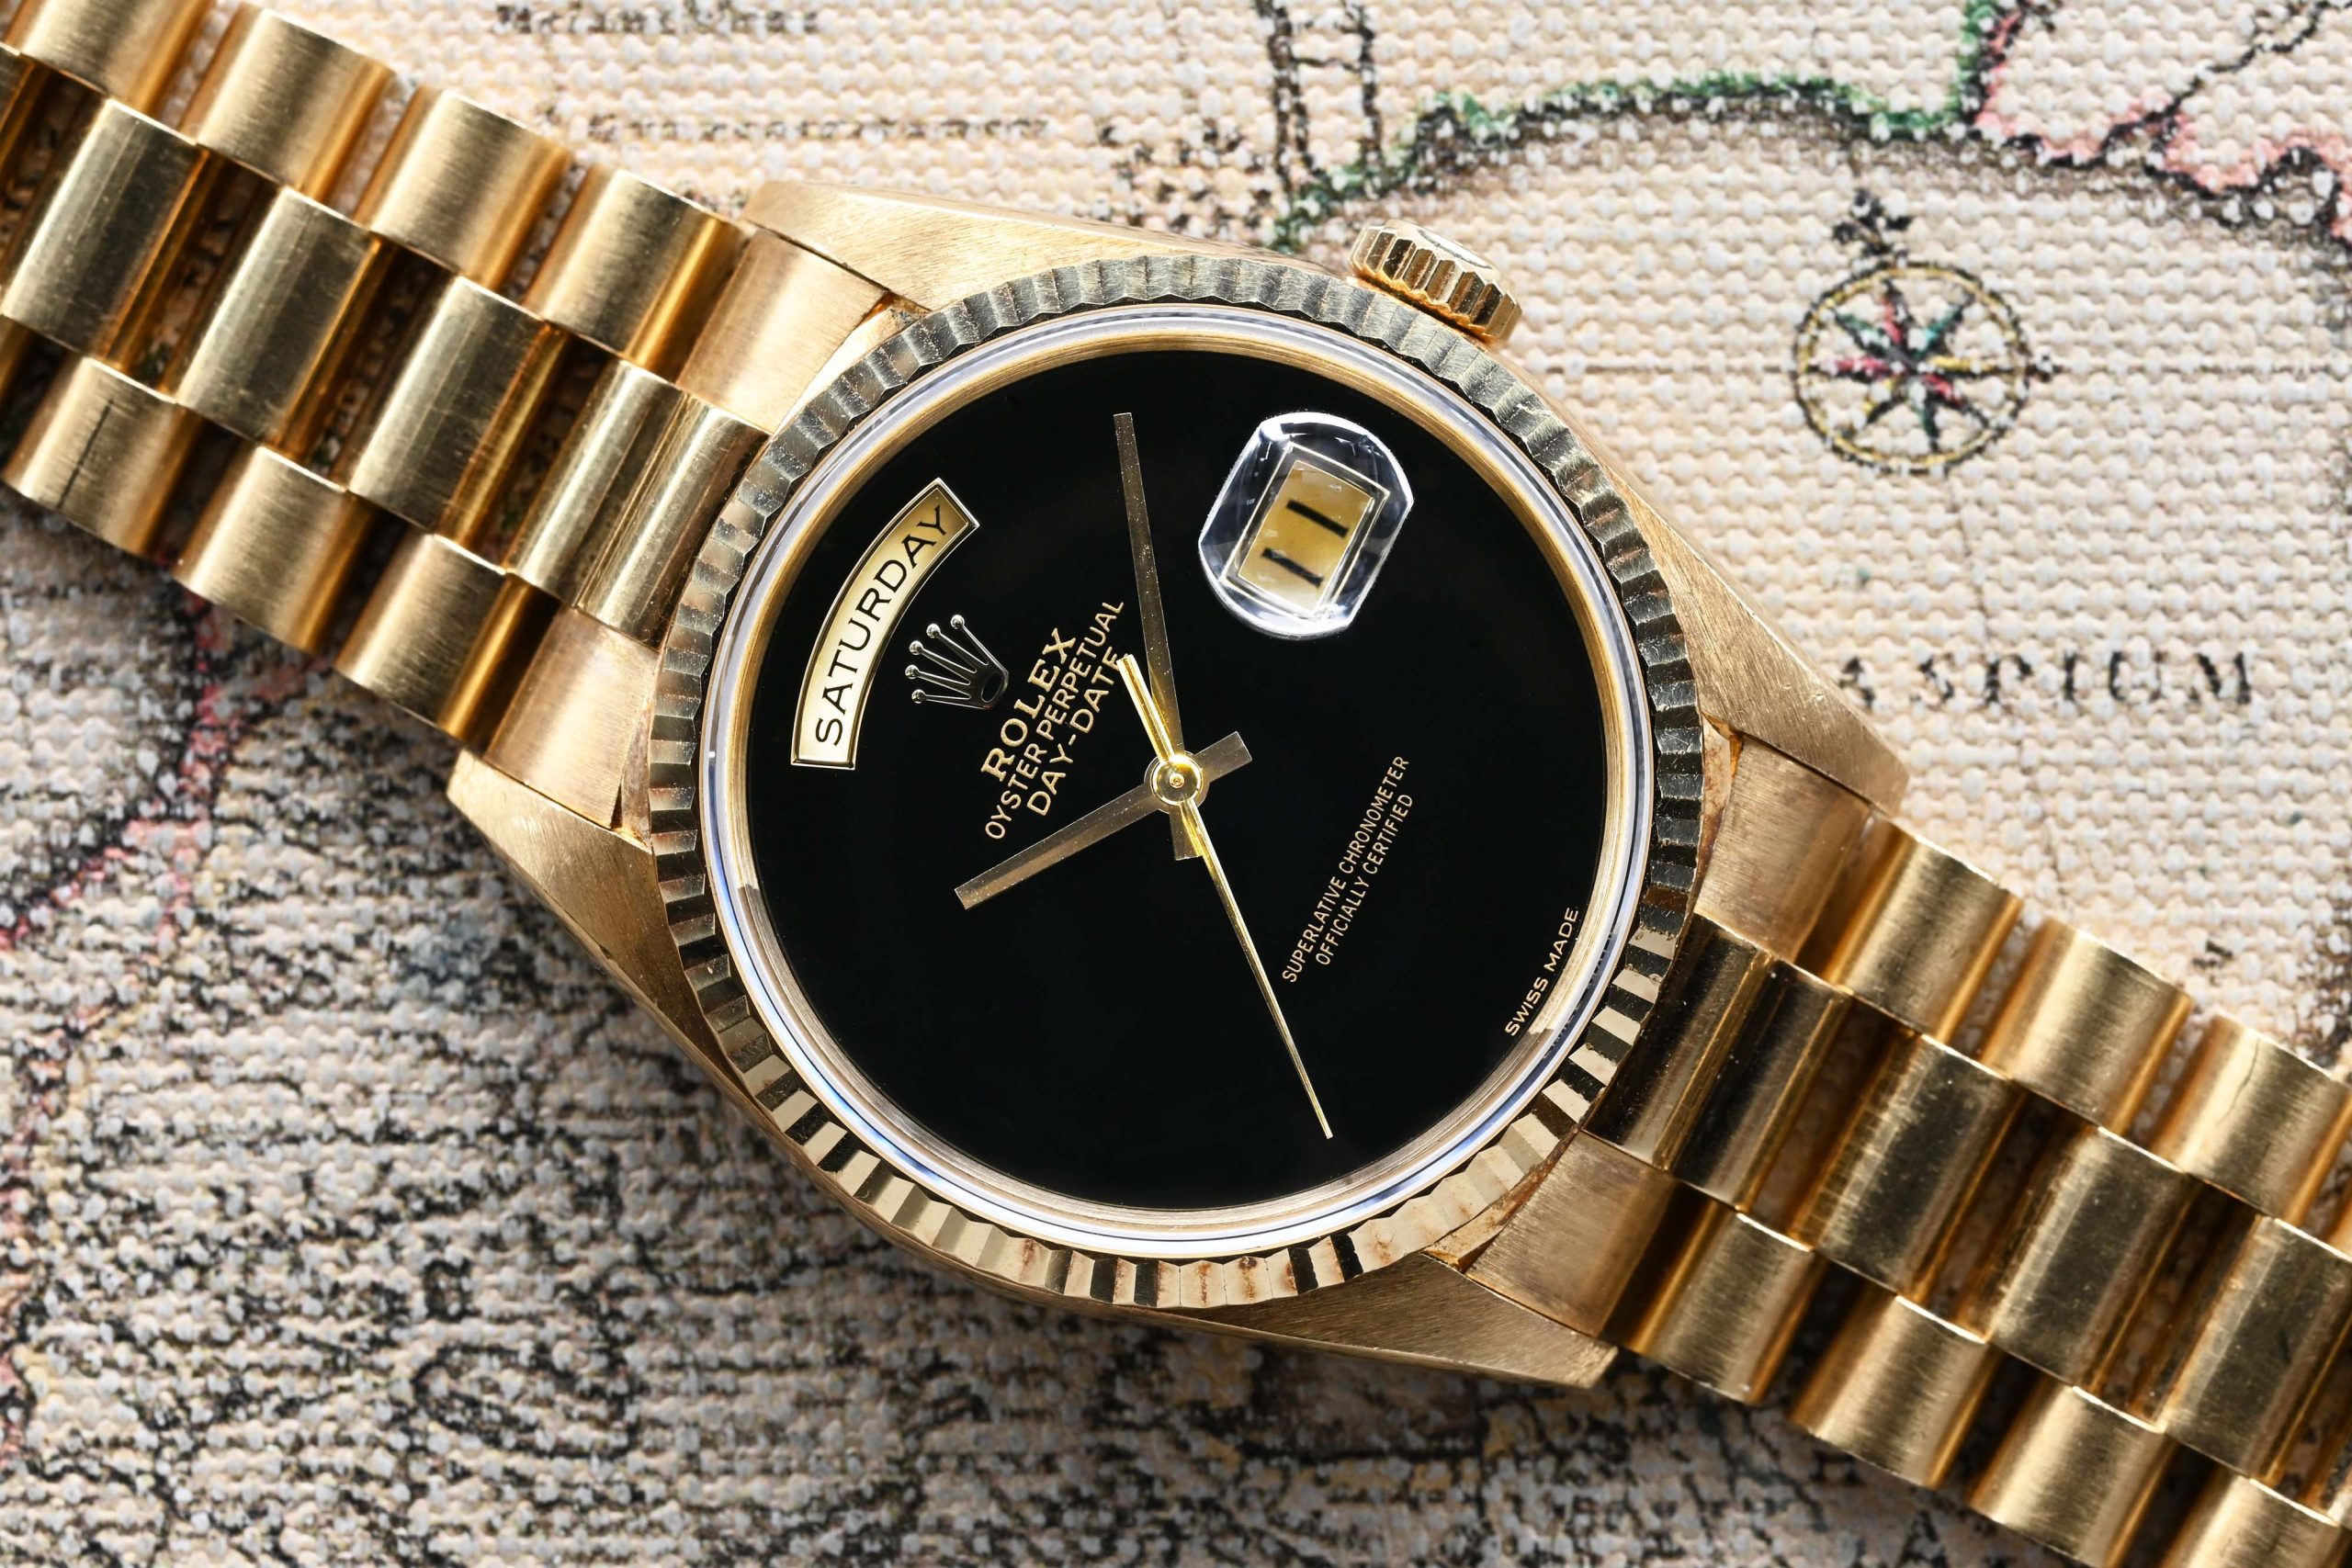 1989 Rolex Day Date Onyx Dial Ref. 18238 - Rolex Passion